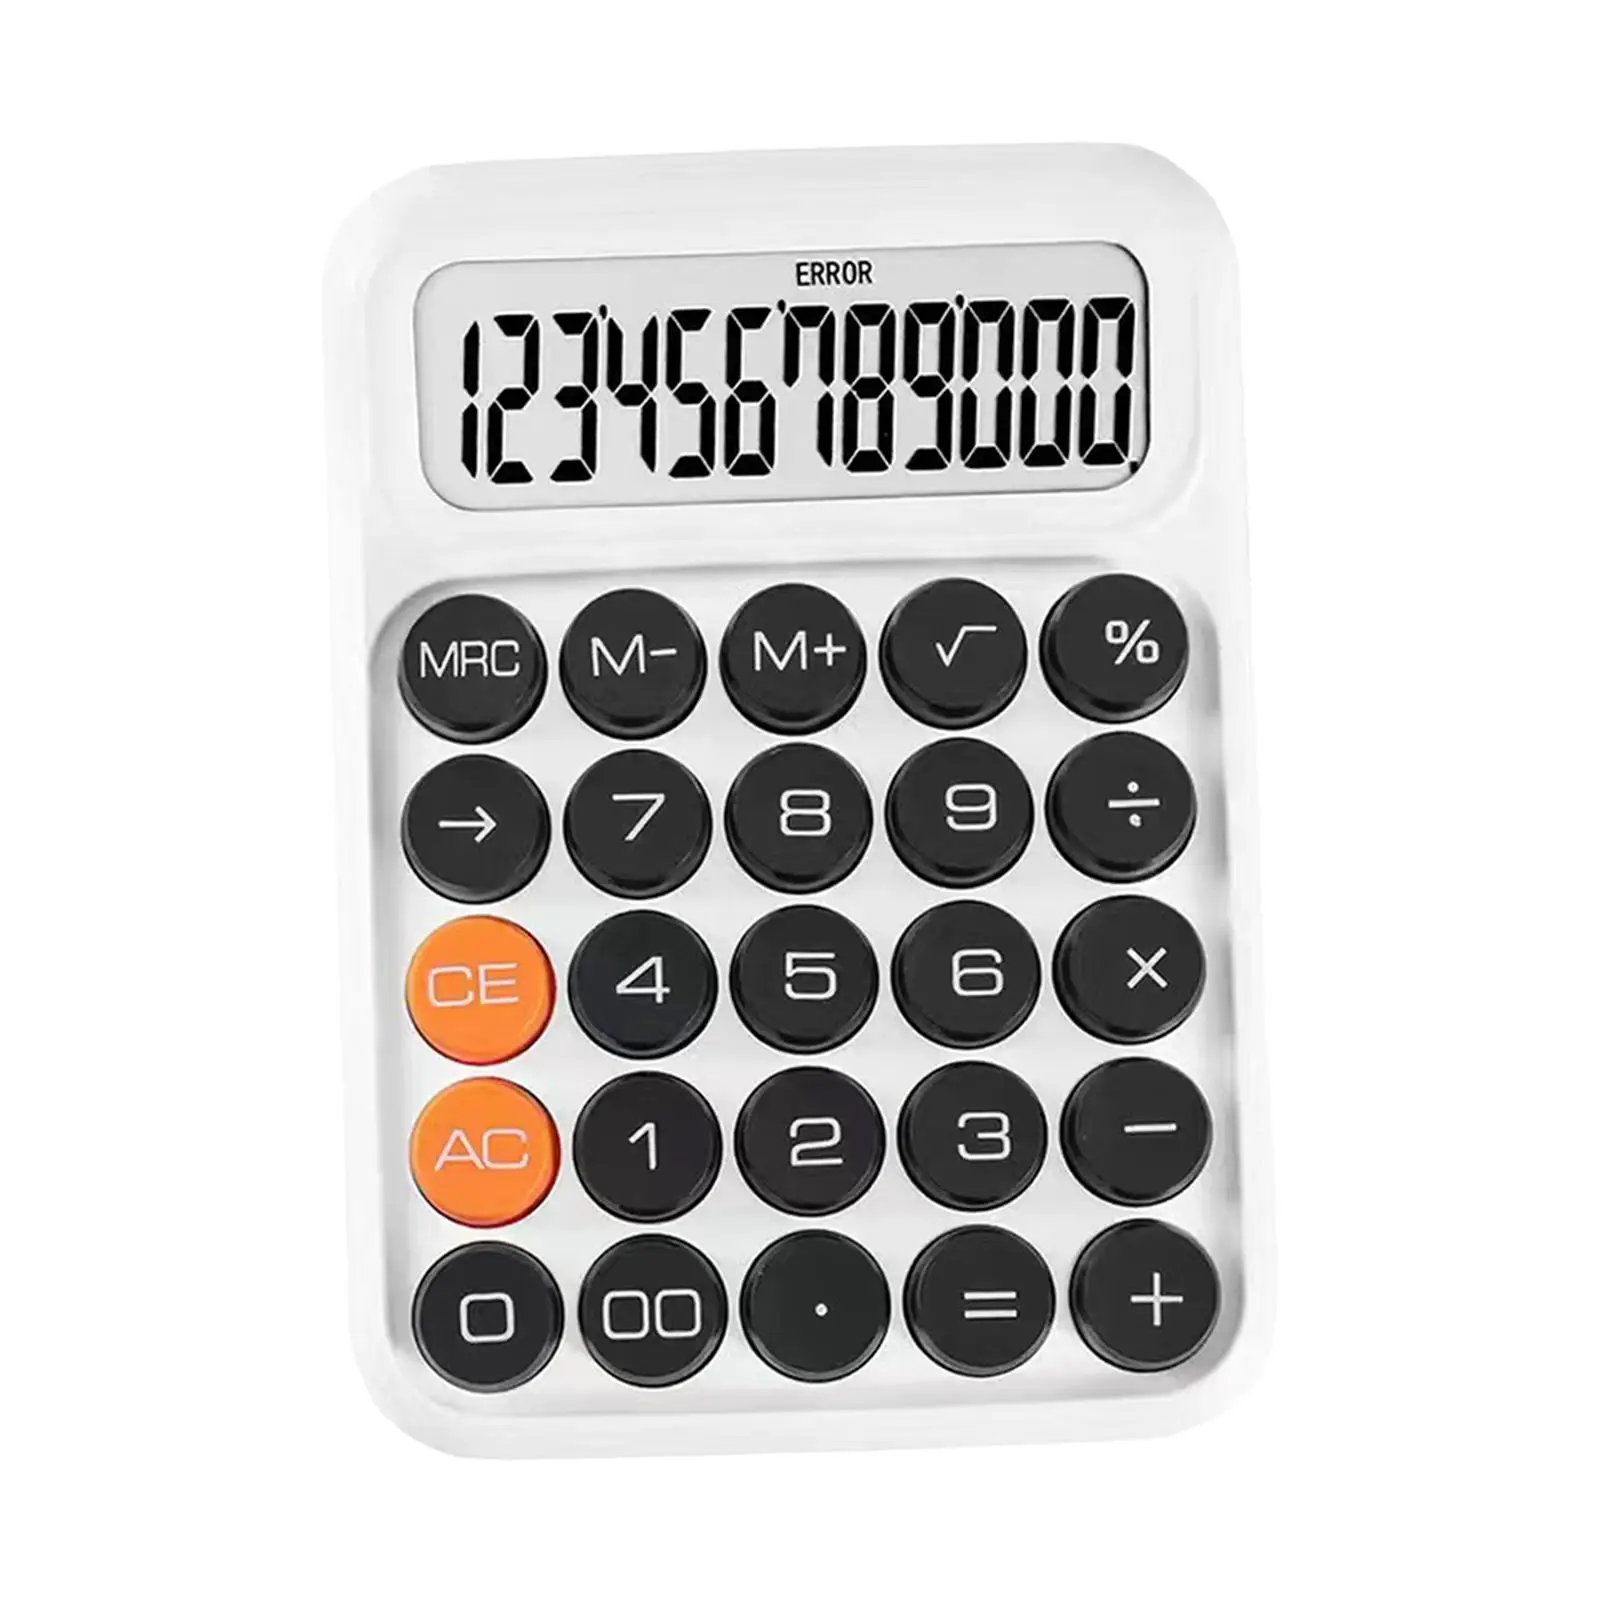 12 Digit Calculator Lightweight Cute Handheld Multifunctional Office Calculators for Travel Business Use Office Home Accounting